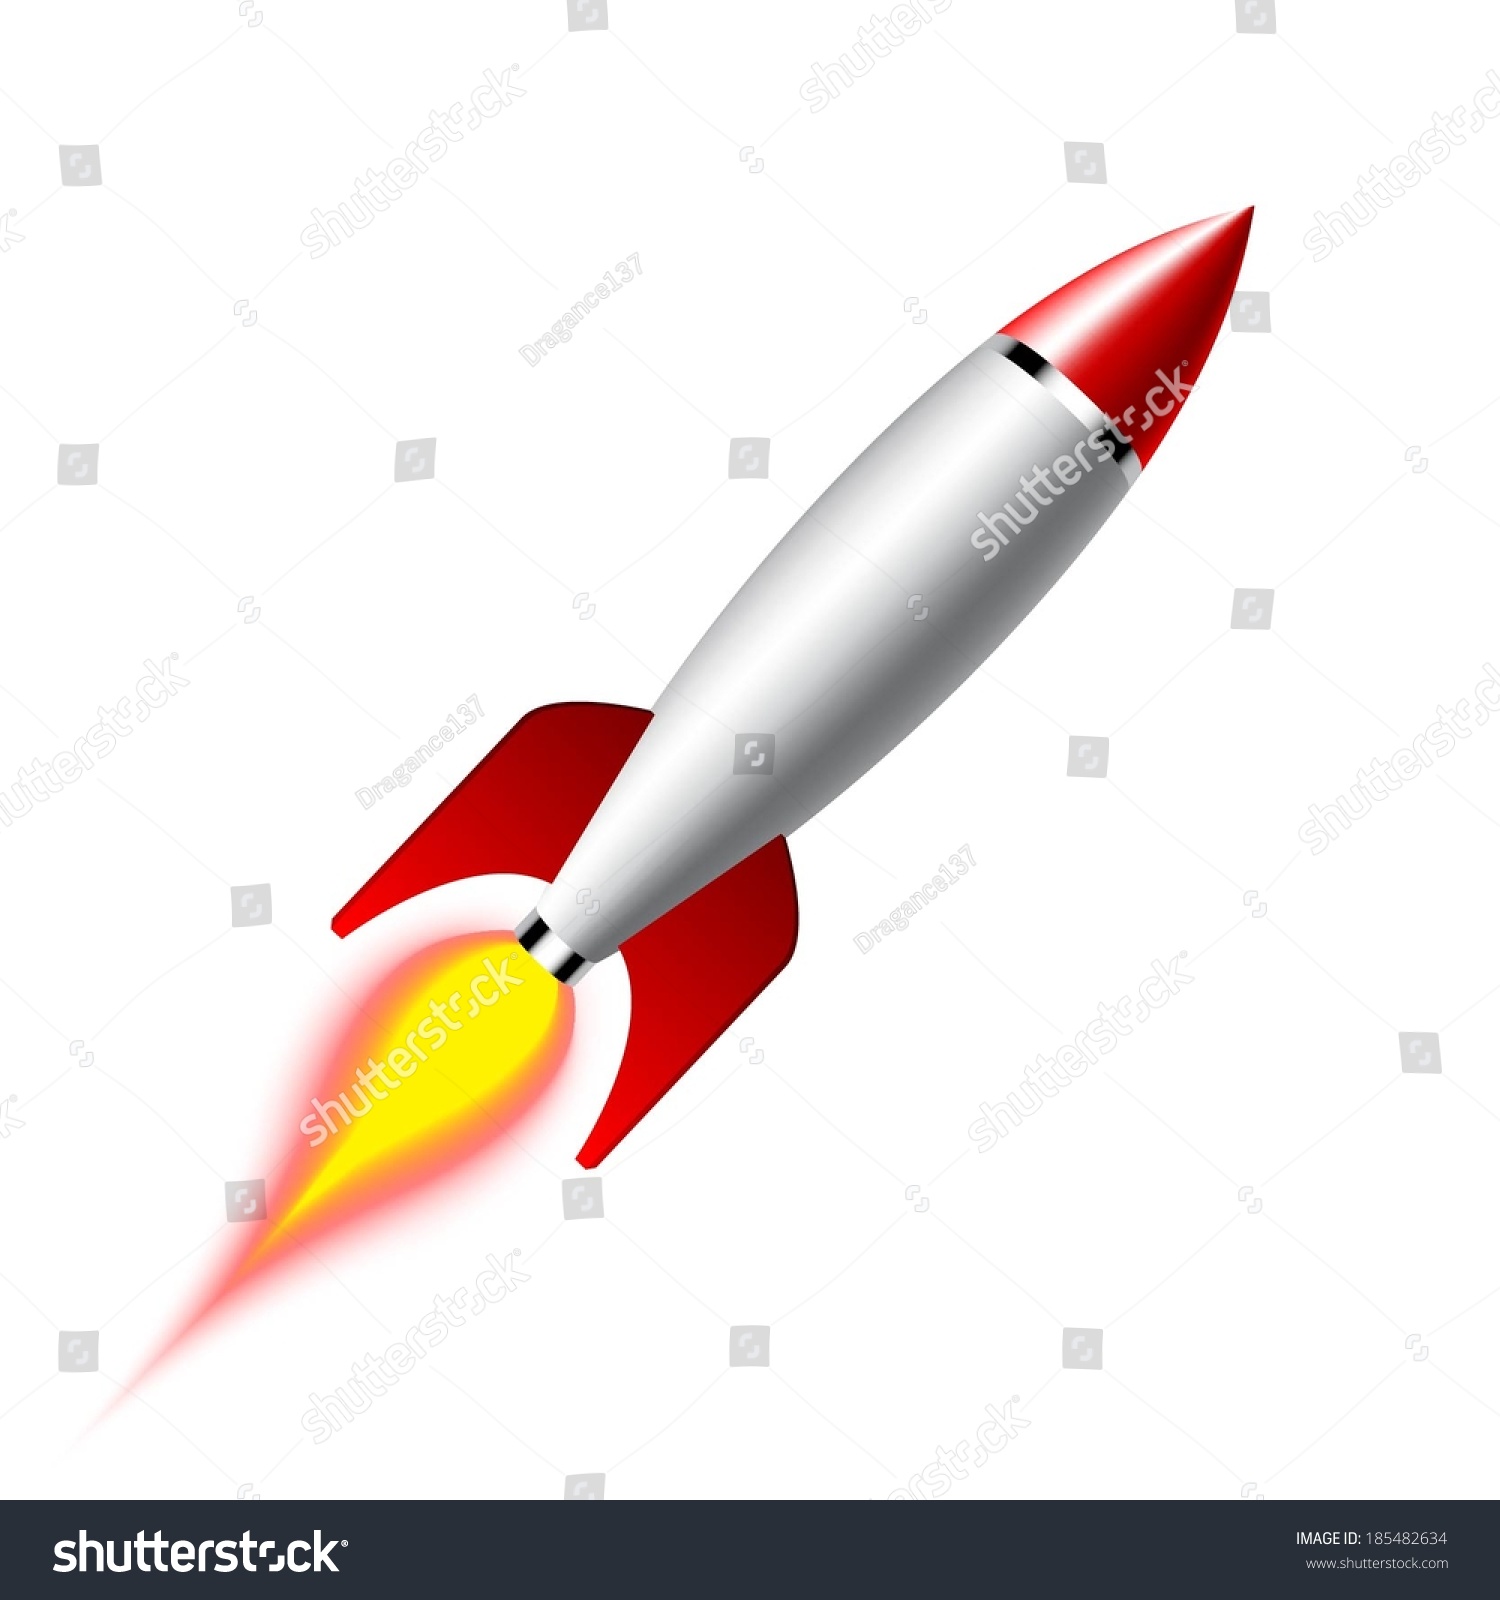 Download 3d Vector Rocket Isolated On White Stock Vector 185482634 ...